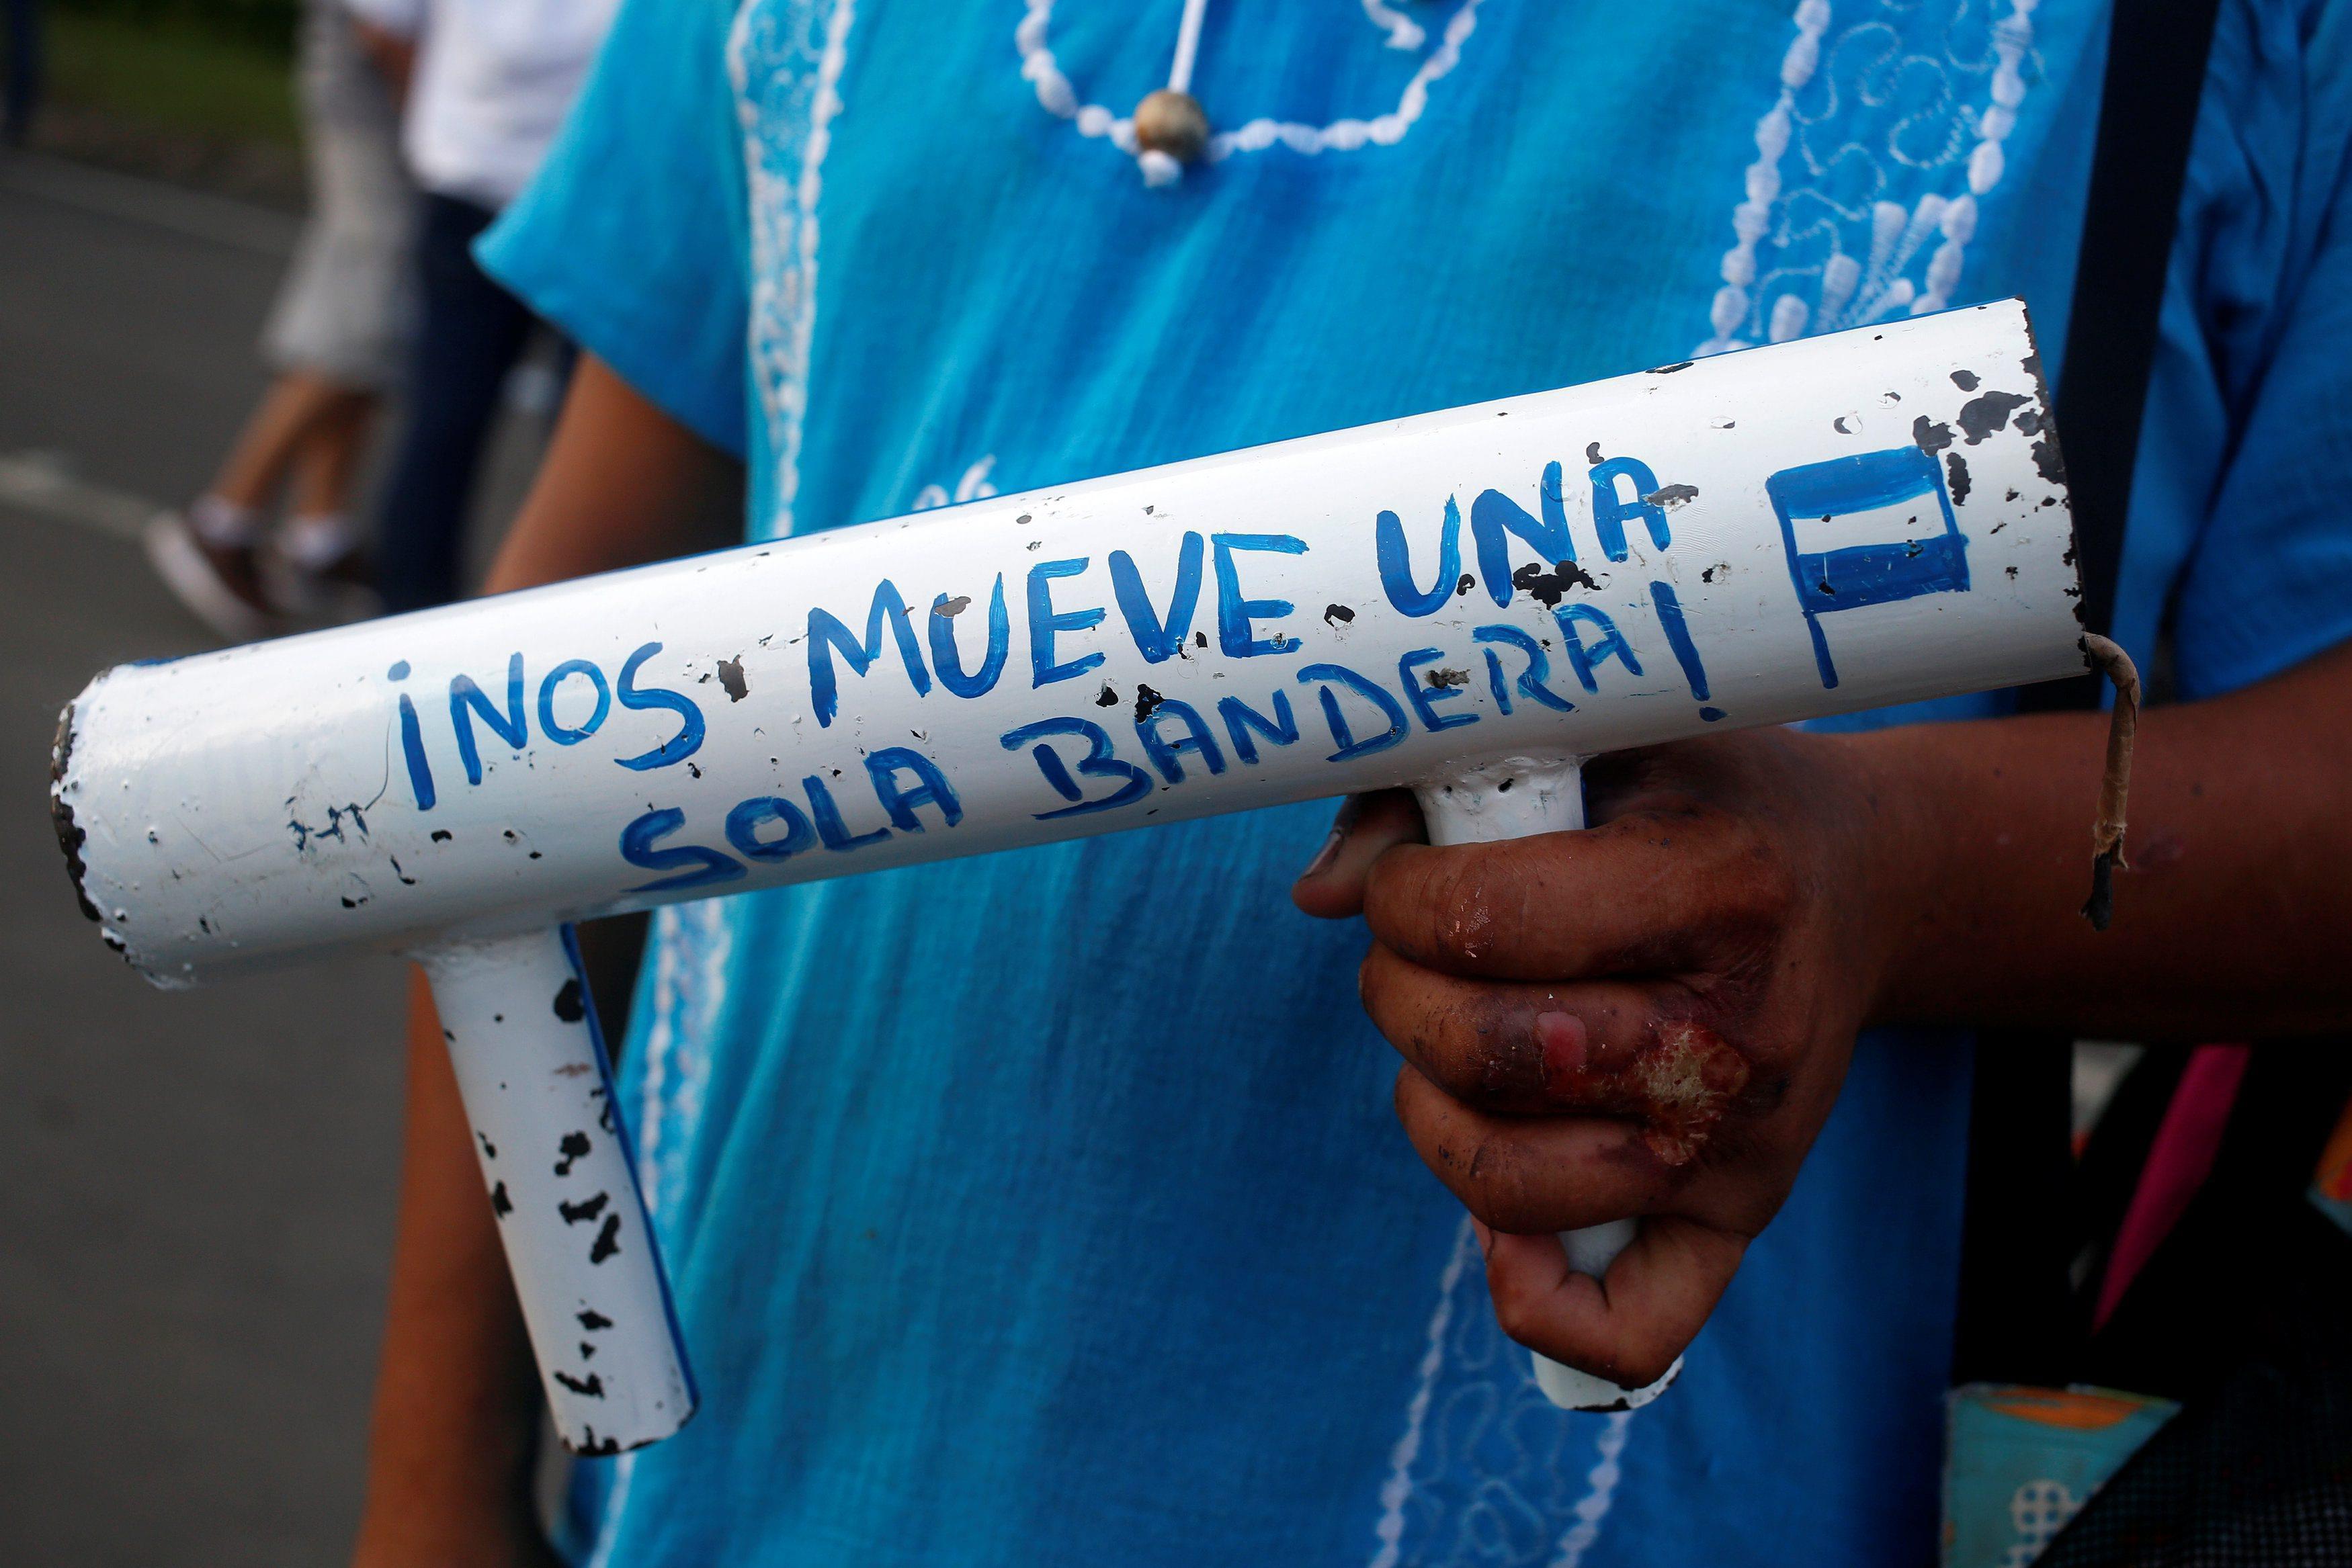 A protester holds a homemade mortar during a protest against President Daniel Ortega's government in